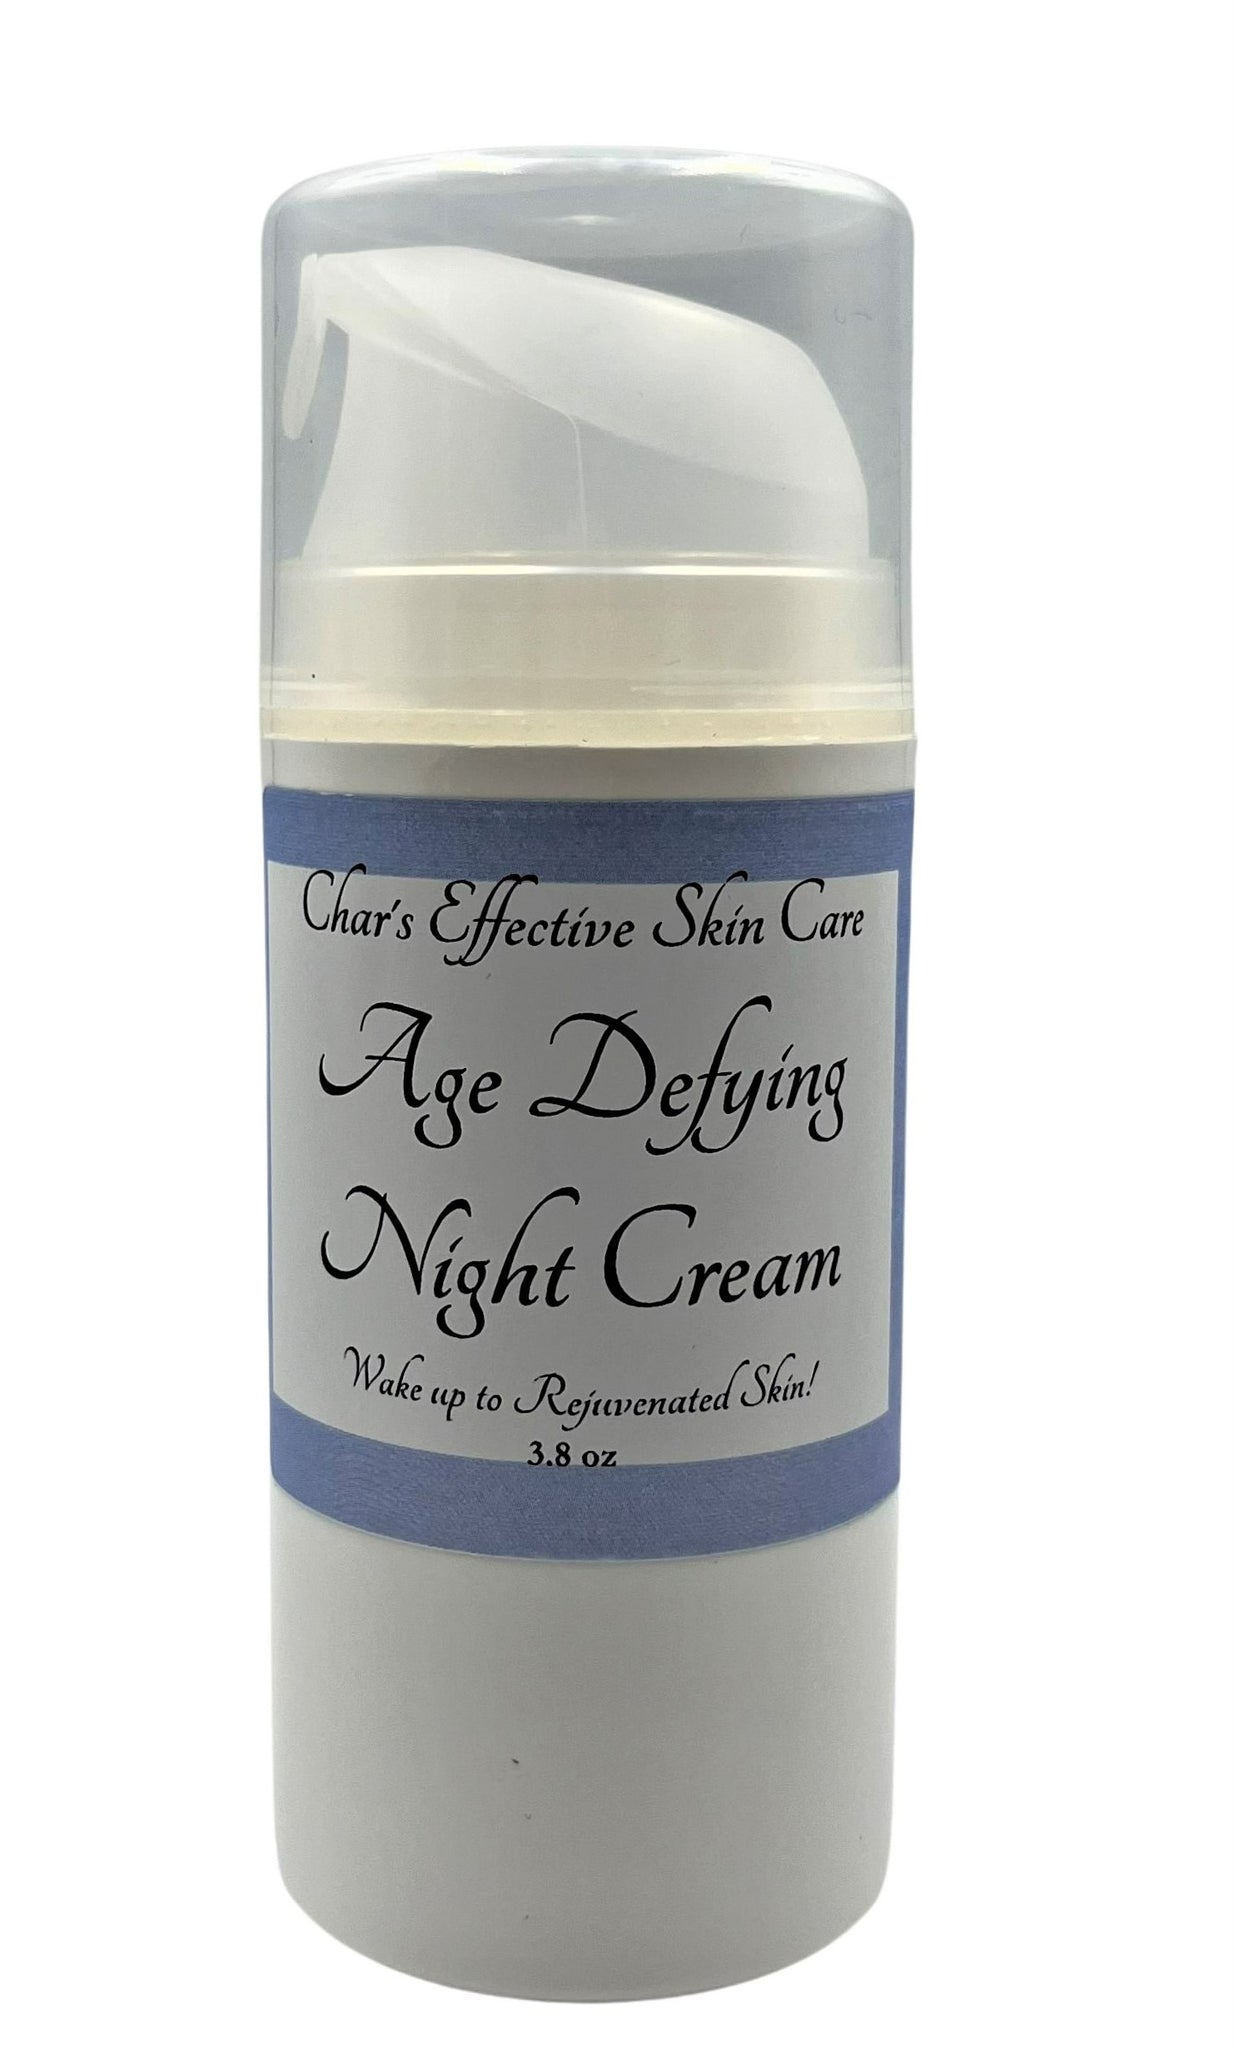 Age-Defying Night Cream/ With Pomegranate, White Tea, Centella Asiatica, Antioxidants, Ceramides & Peptides/ in White 3.8 oz Airless Pump with Clear Cap/ Char's Effective Skin Care